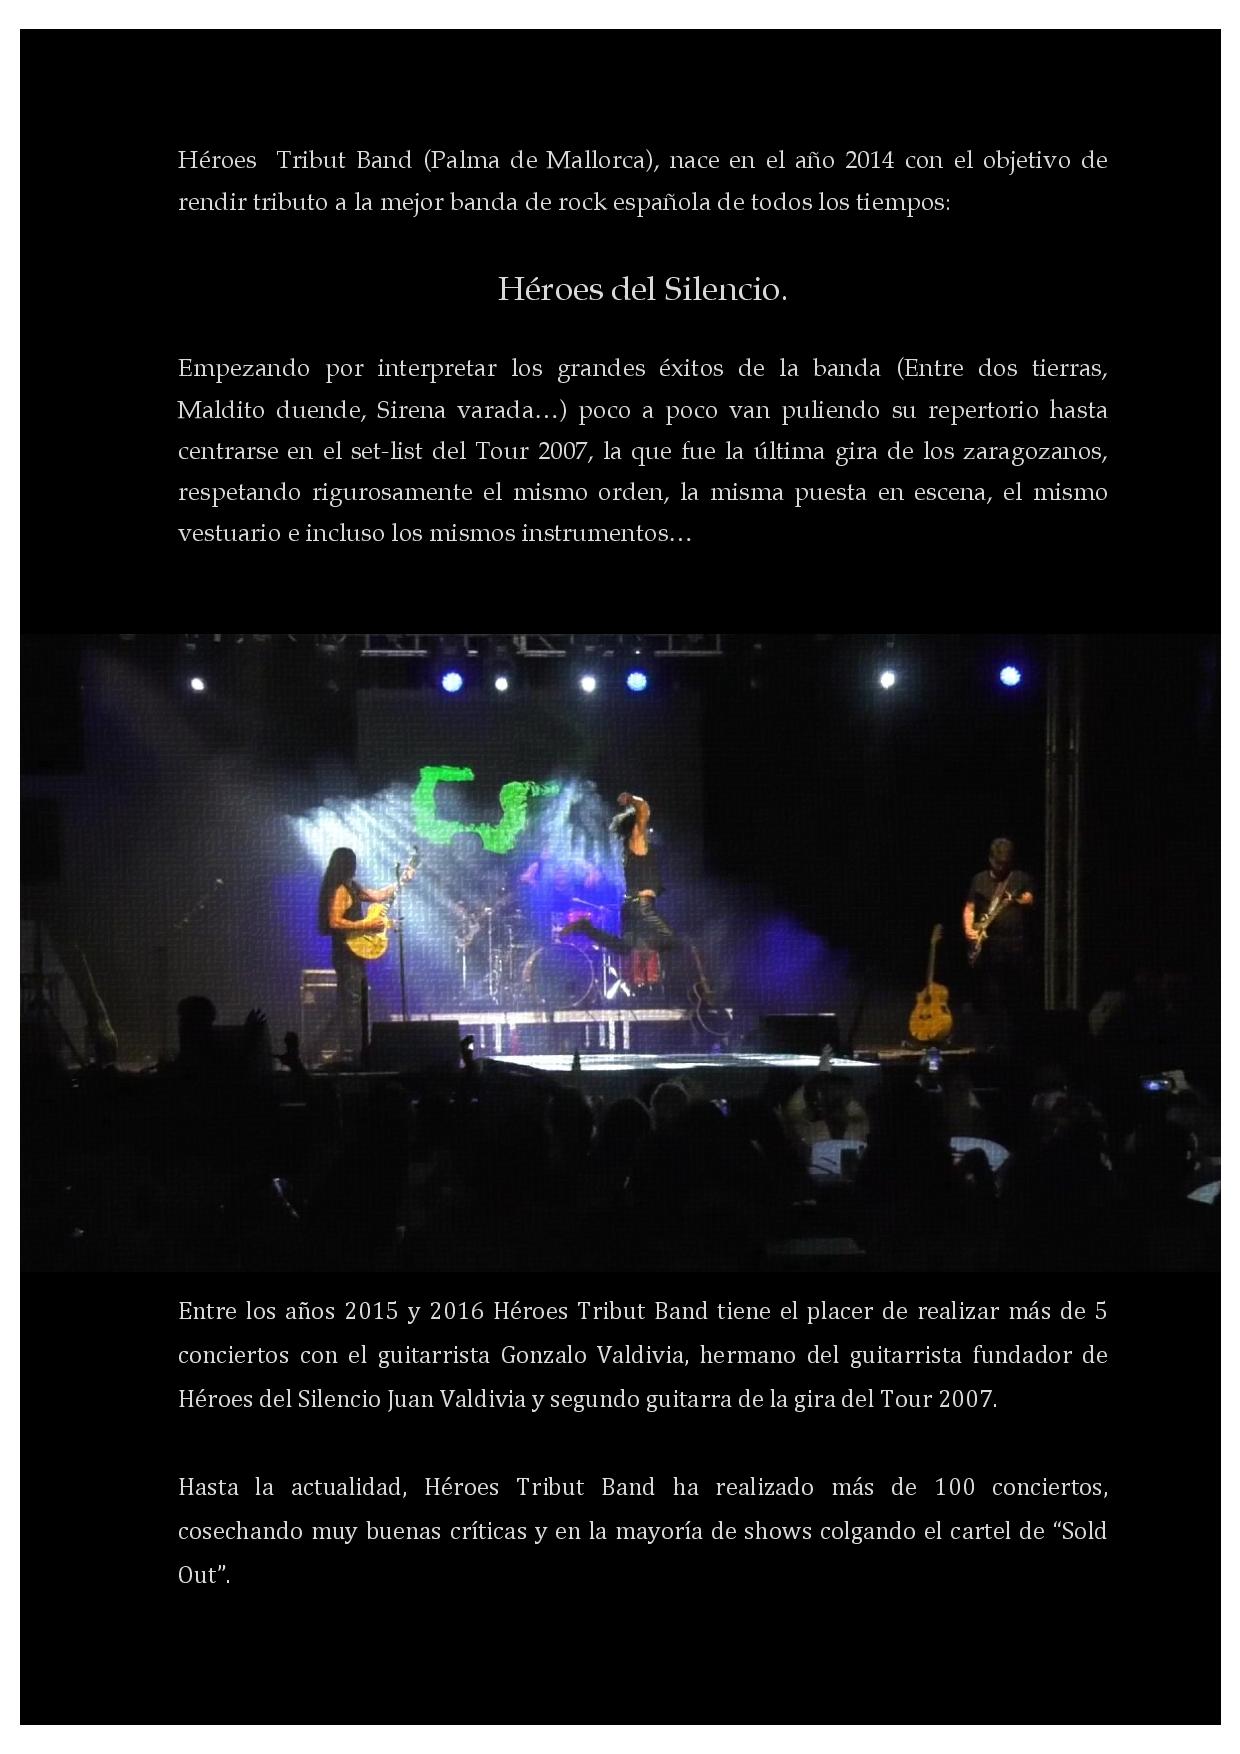 HÉROES TRIBUT BAND DOSSIER-2